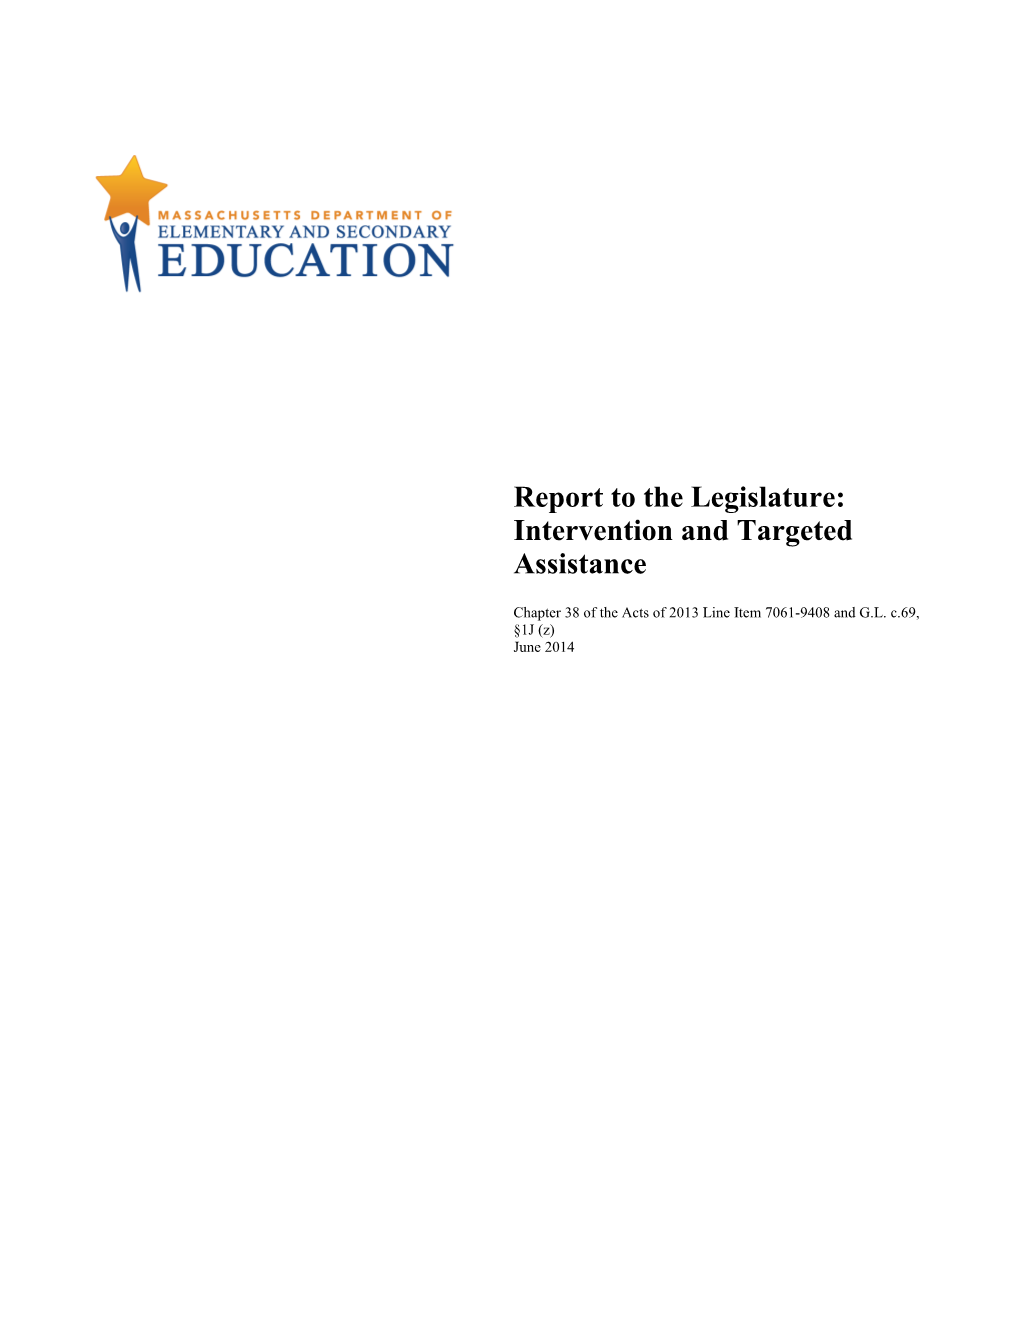 Report to the Legislature: Intervention and Targeted Assistance